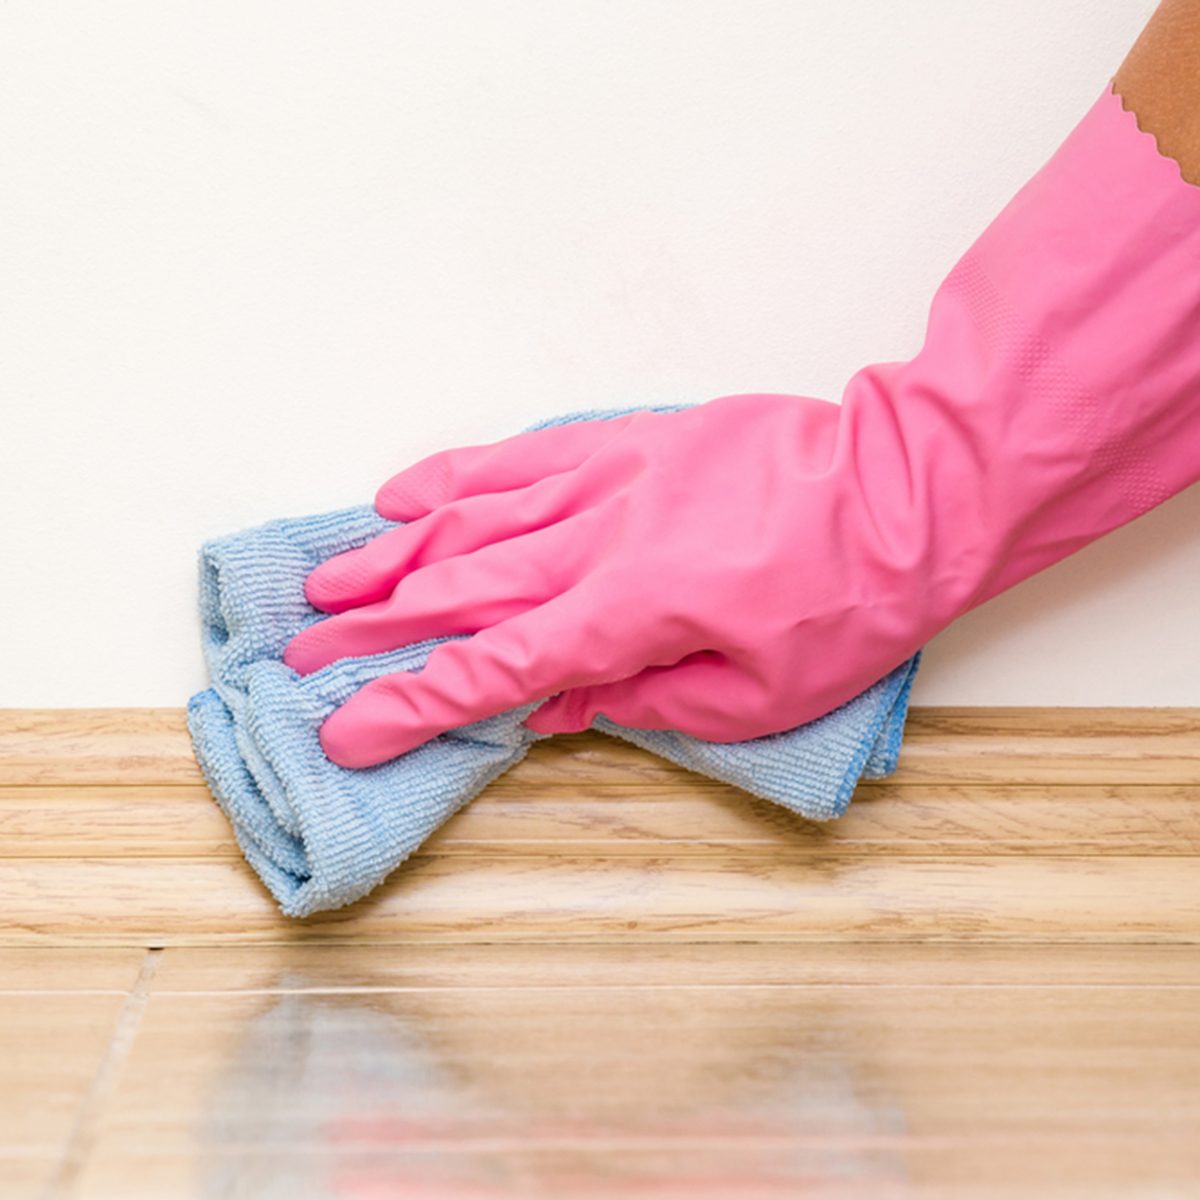 10 Cleaning Mistakes That Are Actually Making Your Home Dirtier